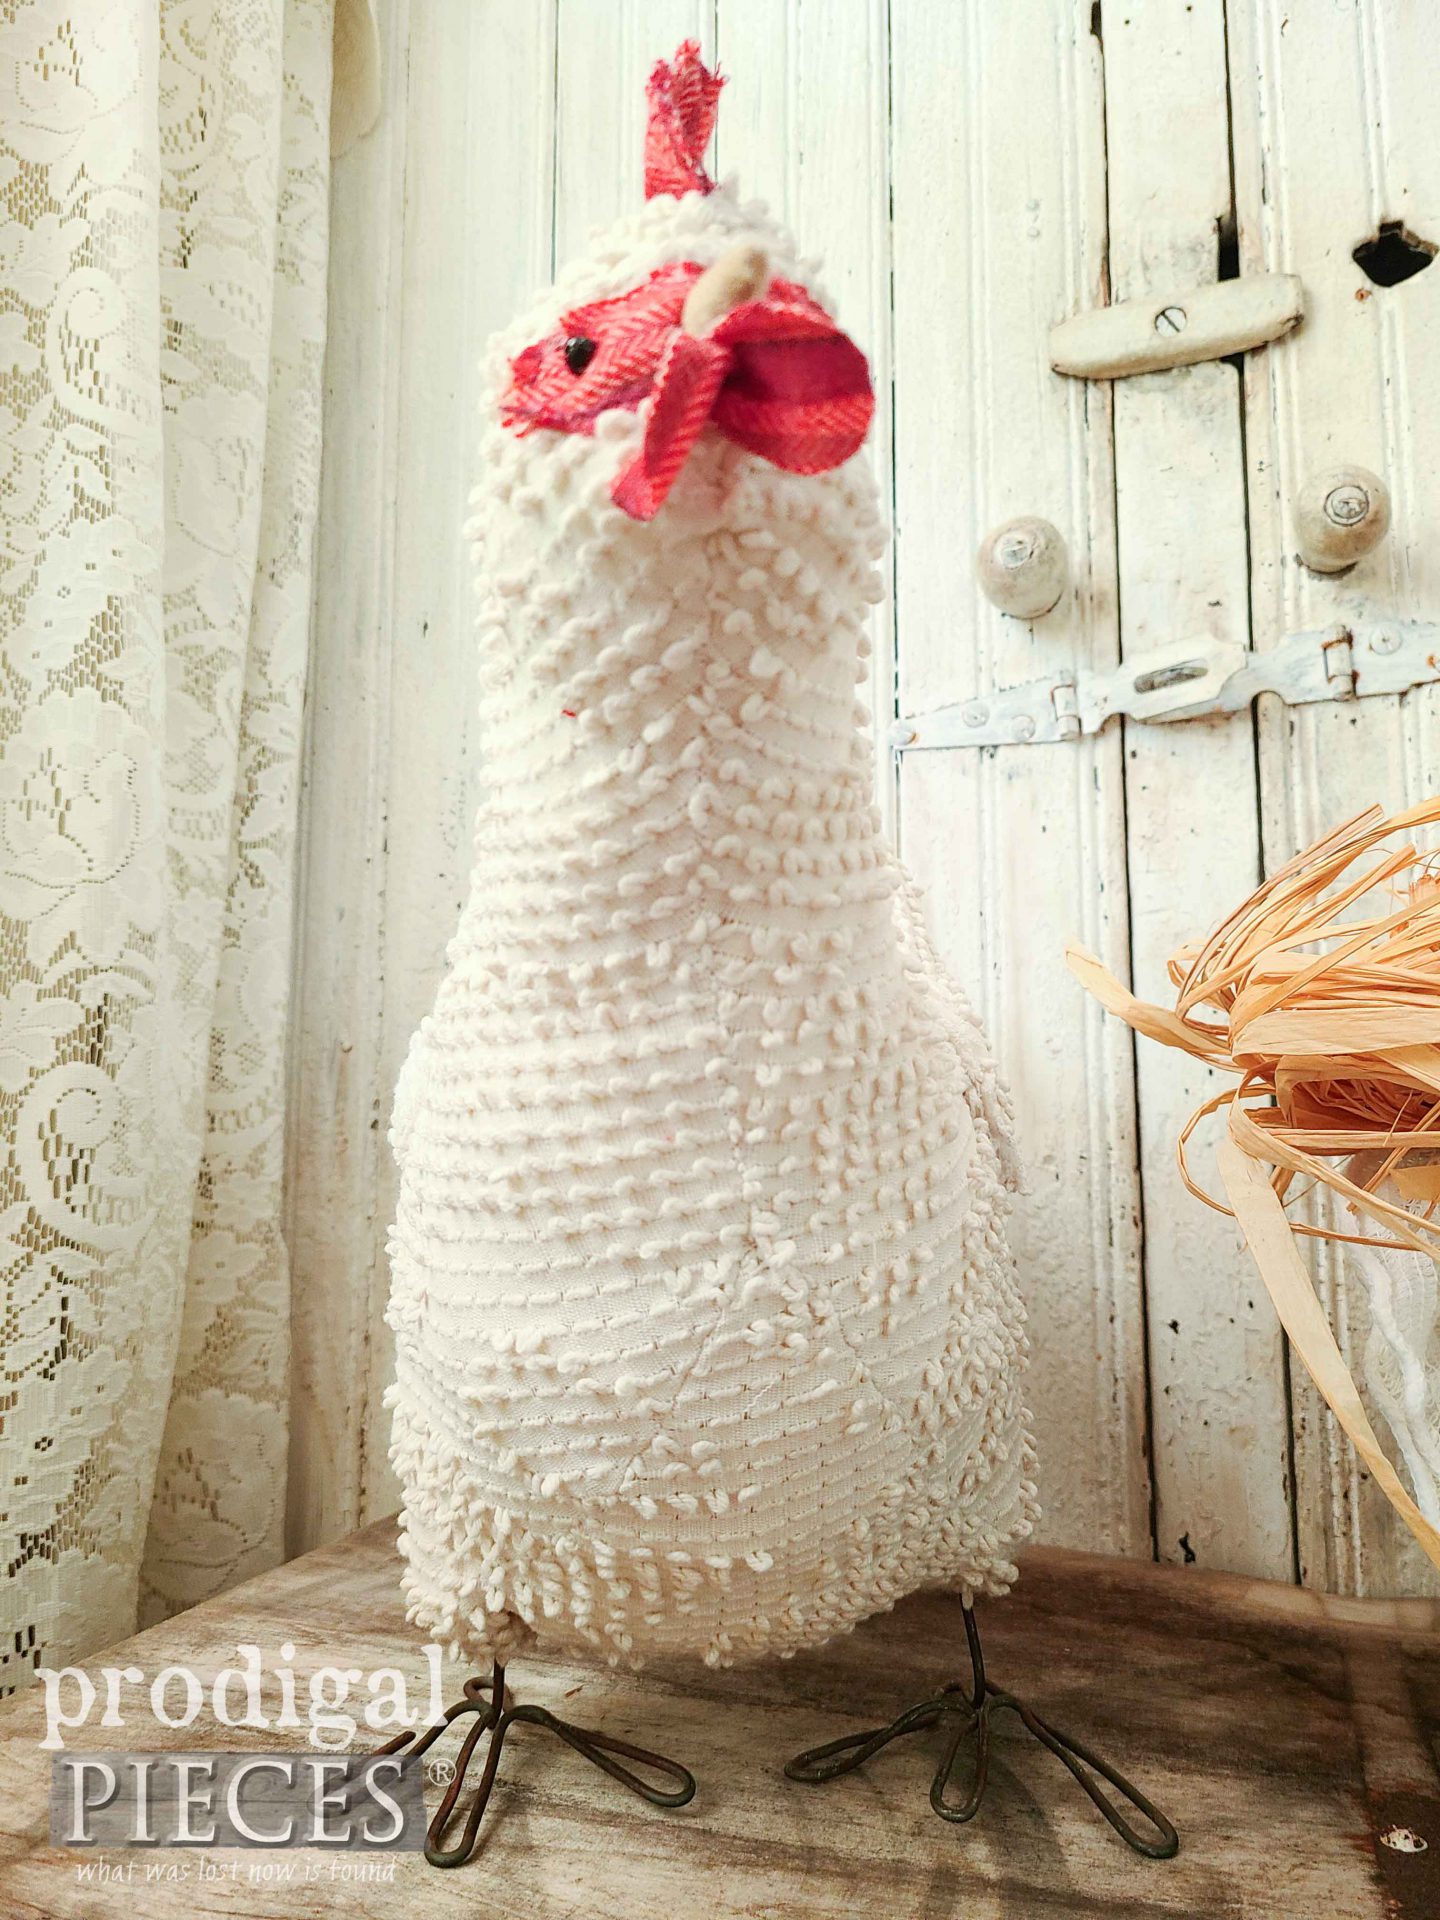 Handmade Chicken with Reclaimed Wire Feet by Larissa of Prodigal Pieces | prodigalpieces.com #prodigalpieces #farmhouse #chicken